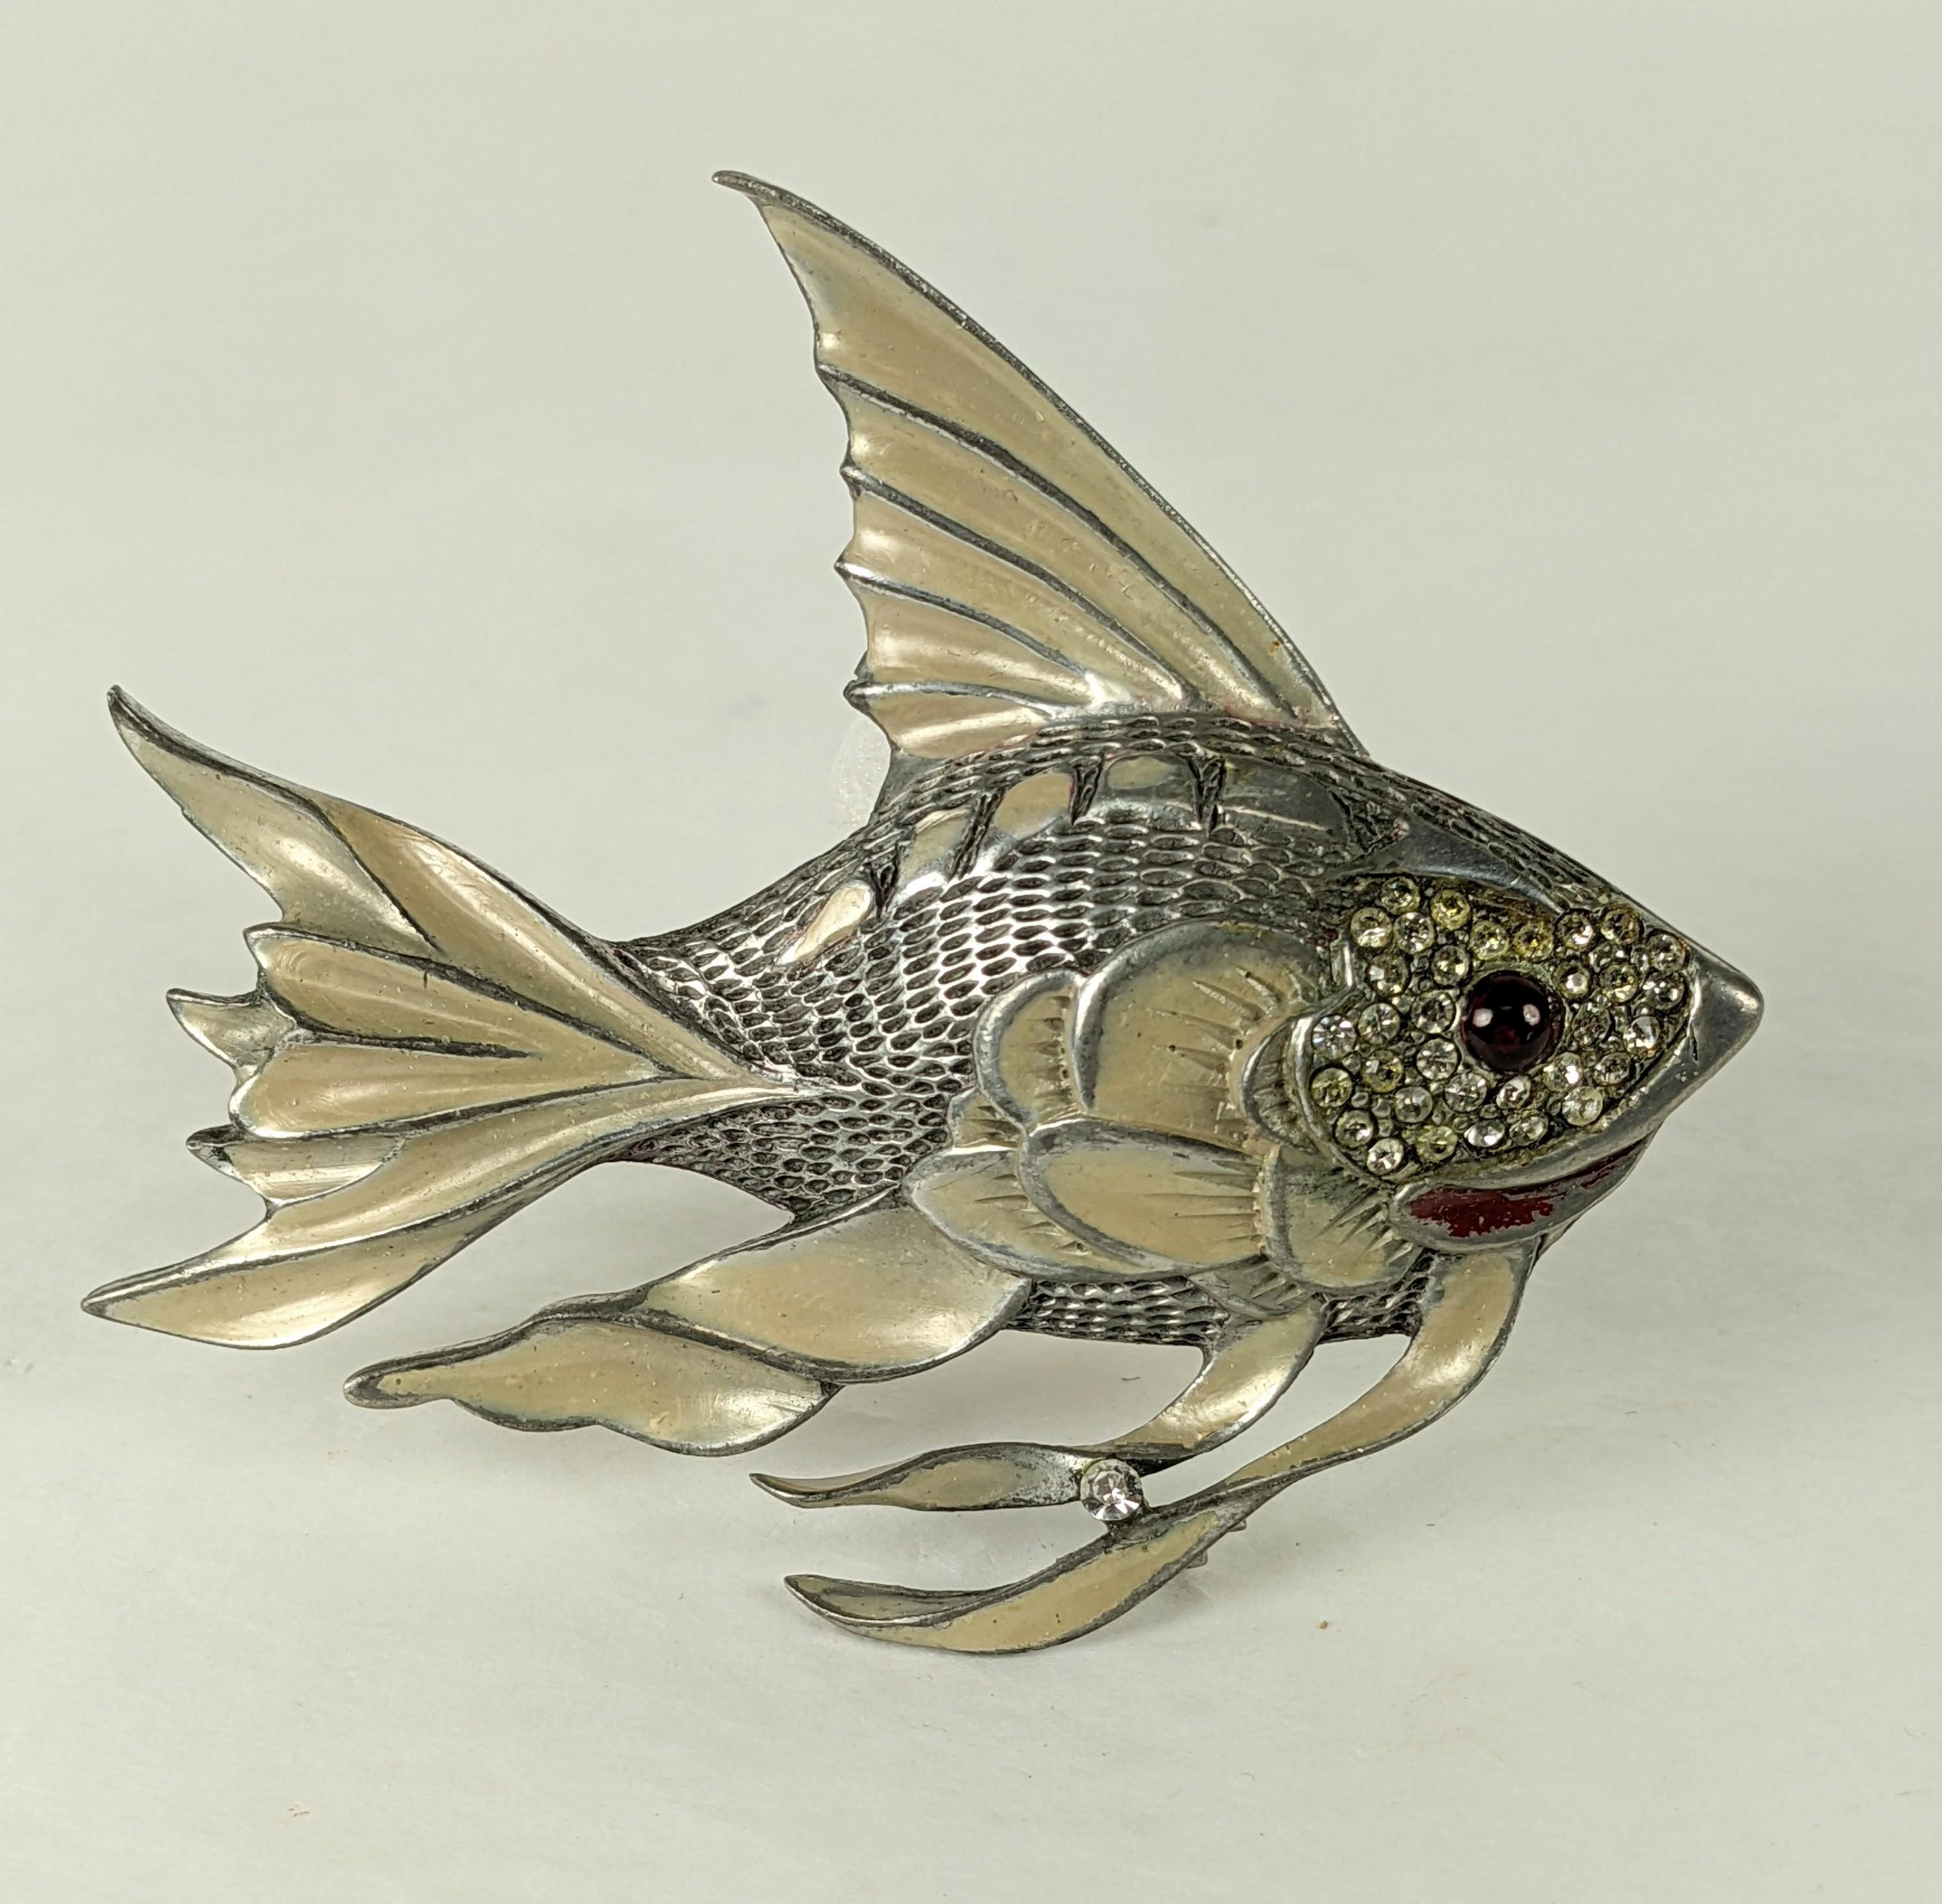 Art Deco Enamel Angel Fish Brooch from the 1930's. Large in scale with pearlized cream enamel with ruby glass cab eye. High quality fantasy costume jewelry from the Art Deco Period. 1930's USA.  3.5